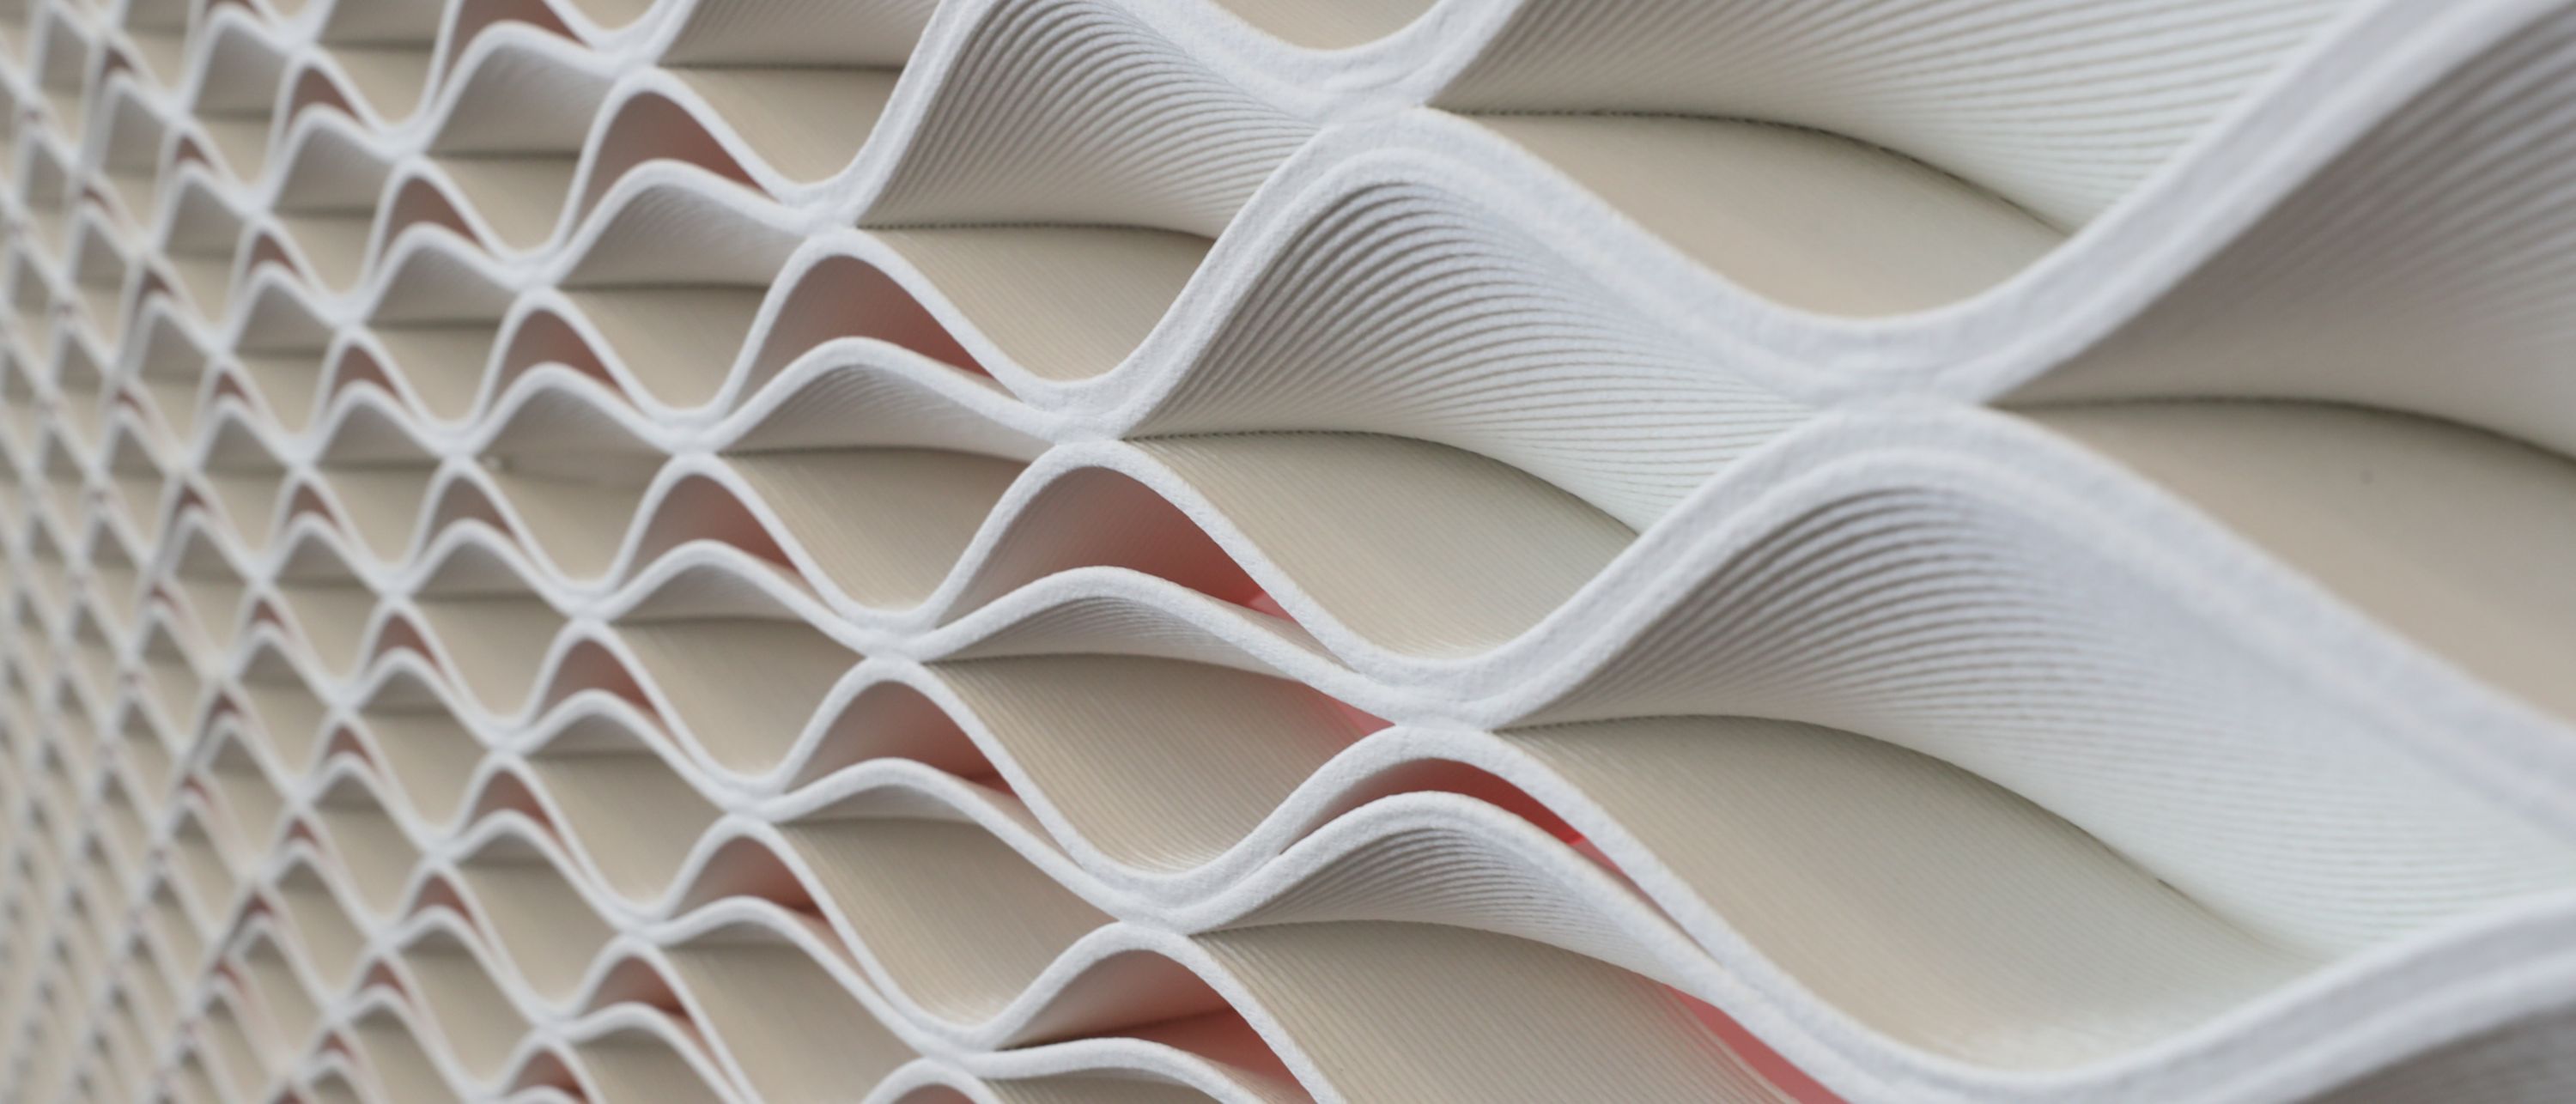 The 3D Printed wall in the Henkel Innovation and Interaction Centre, made from Loctite products and designed by Jennings Design Studio, Dublin and Aectual, Netherlands